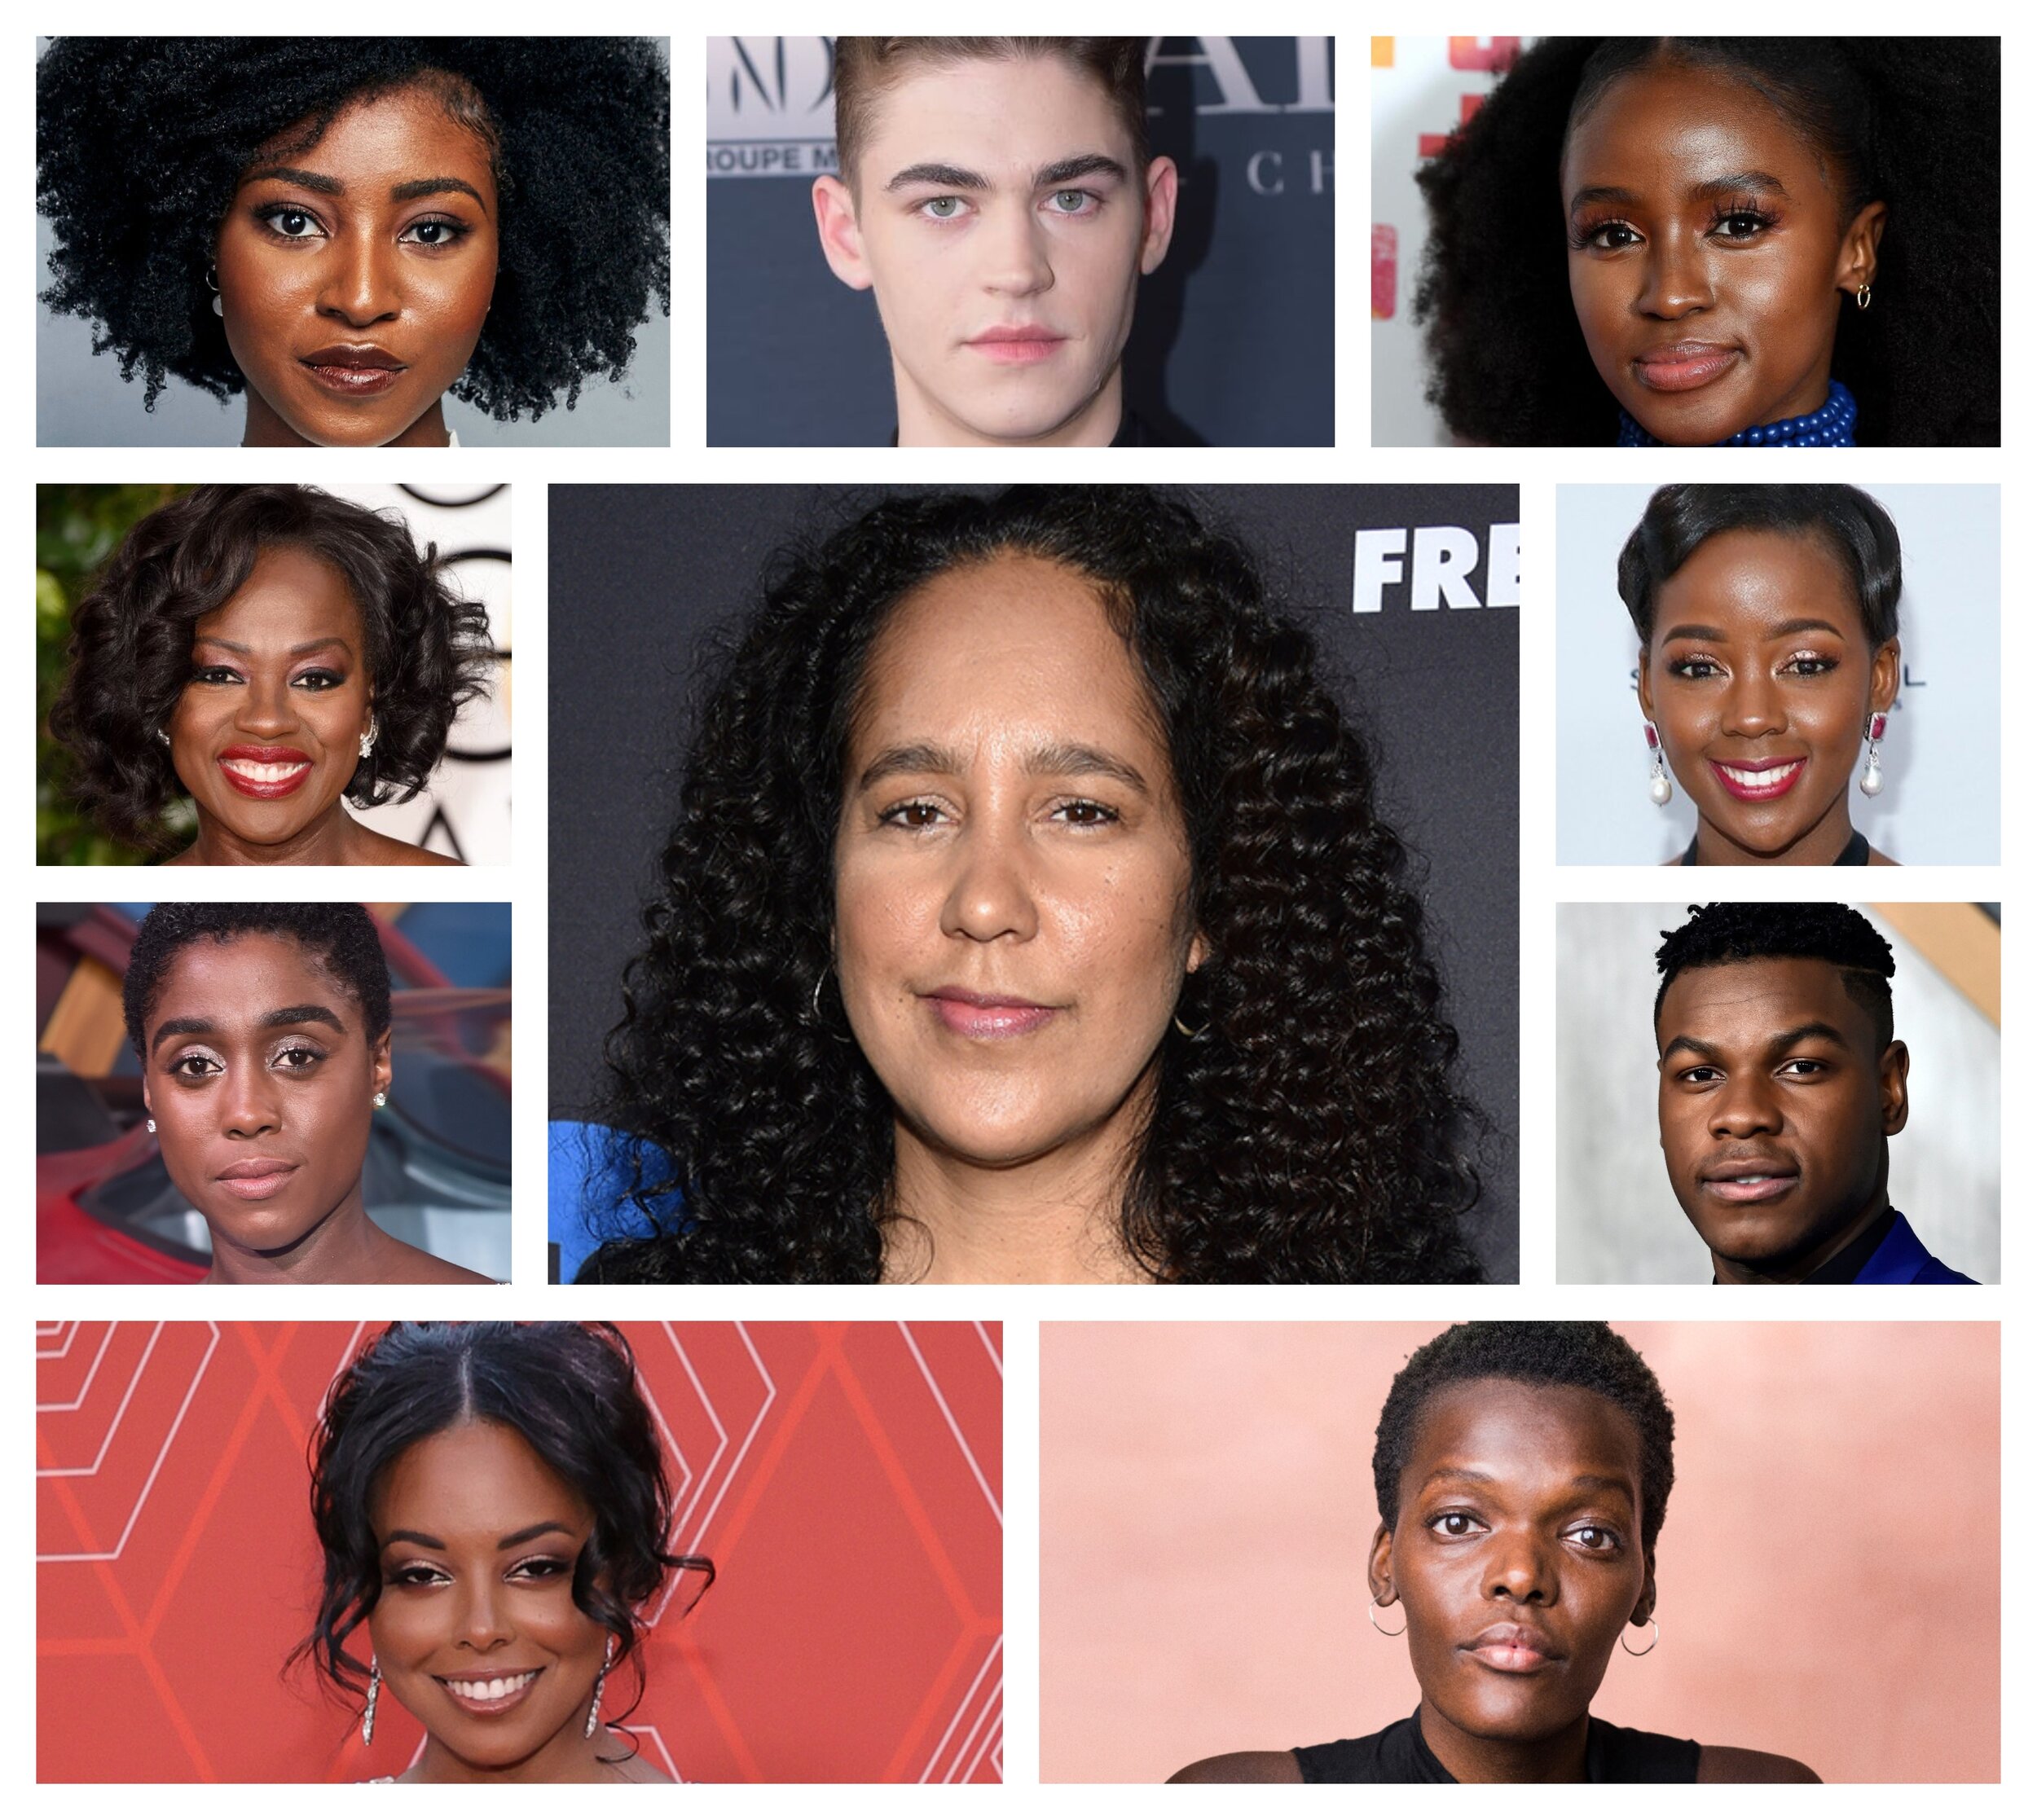 Jayme Lawson, Hero Fiennes Tiffin and Masali Baduza added to Gina  Prince-Bythewood's The Woman King —